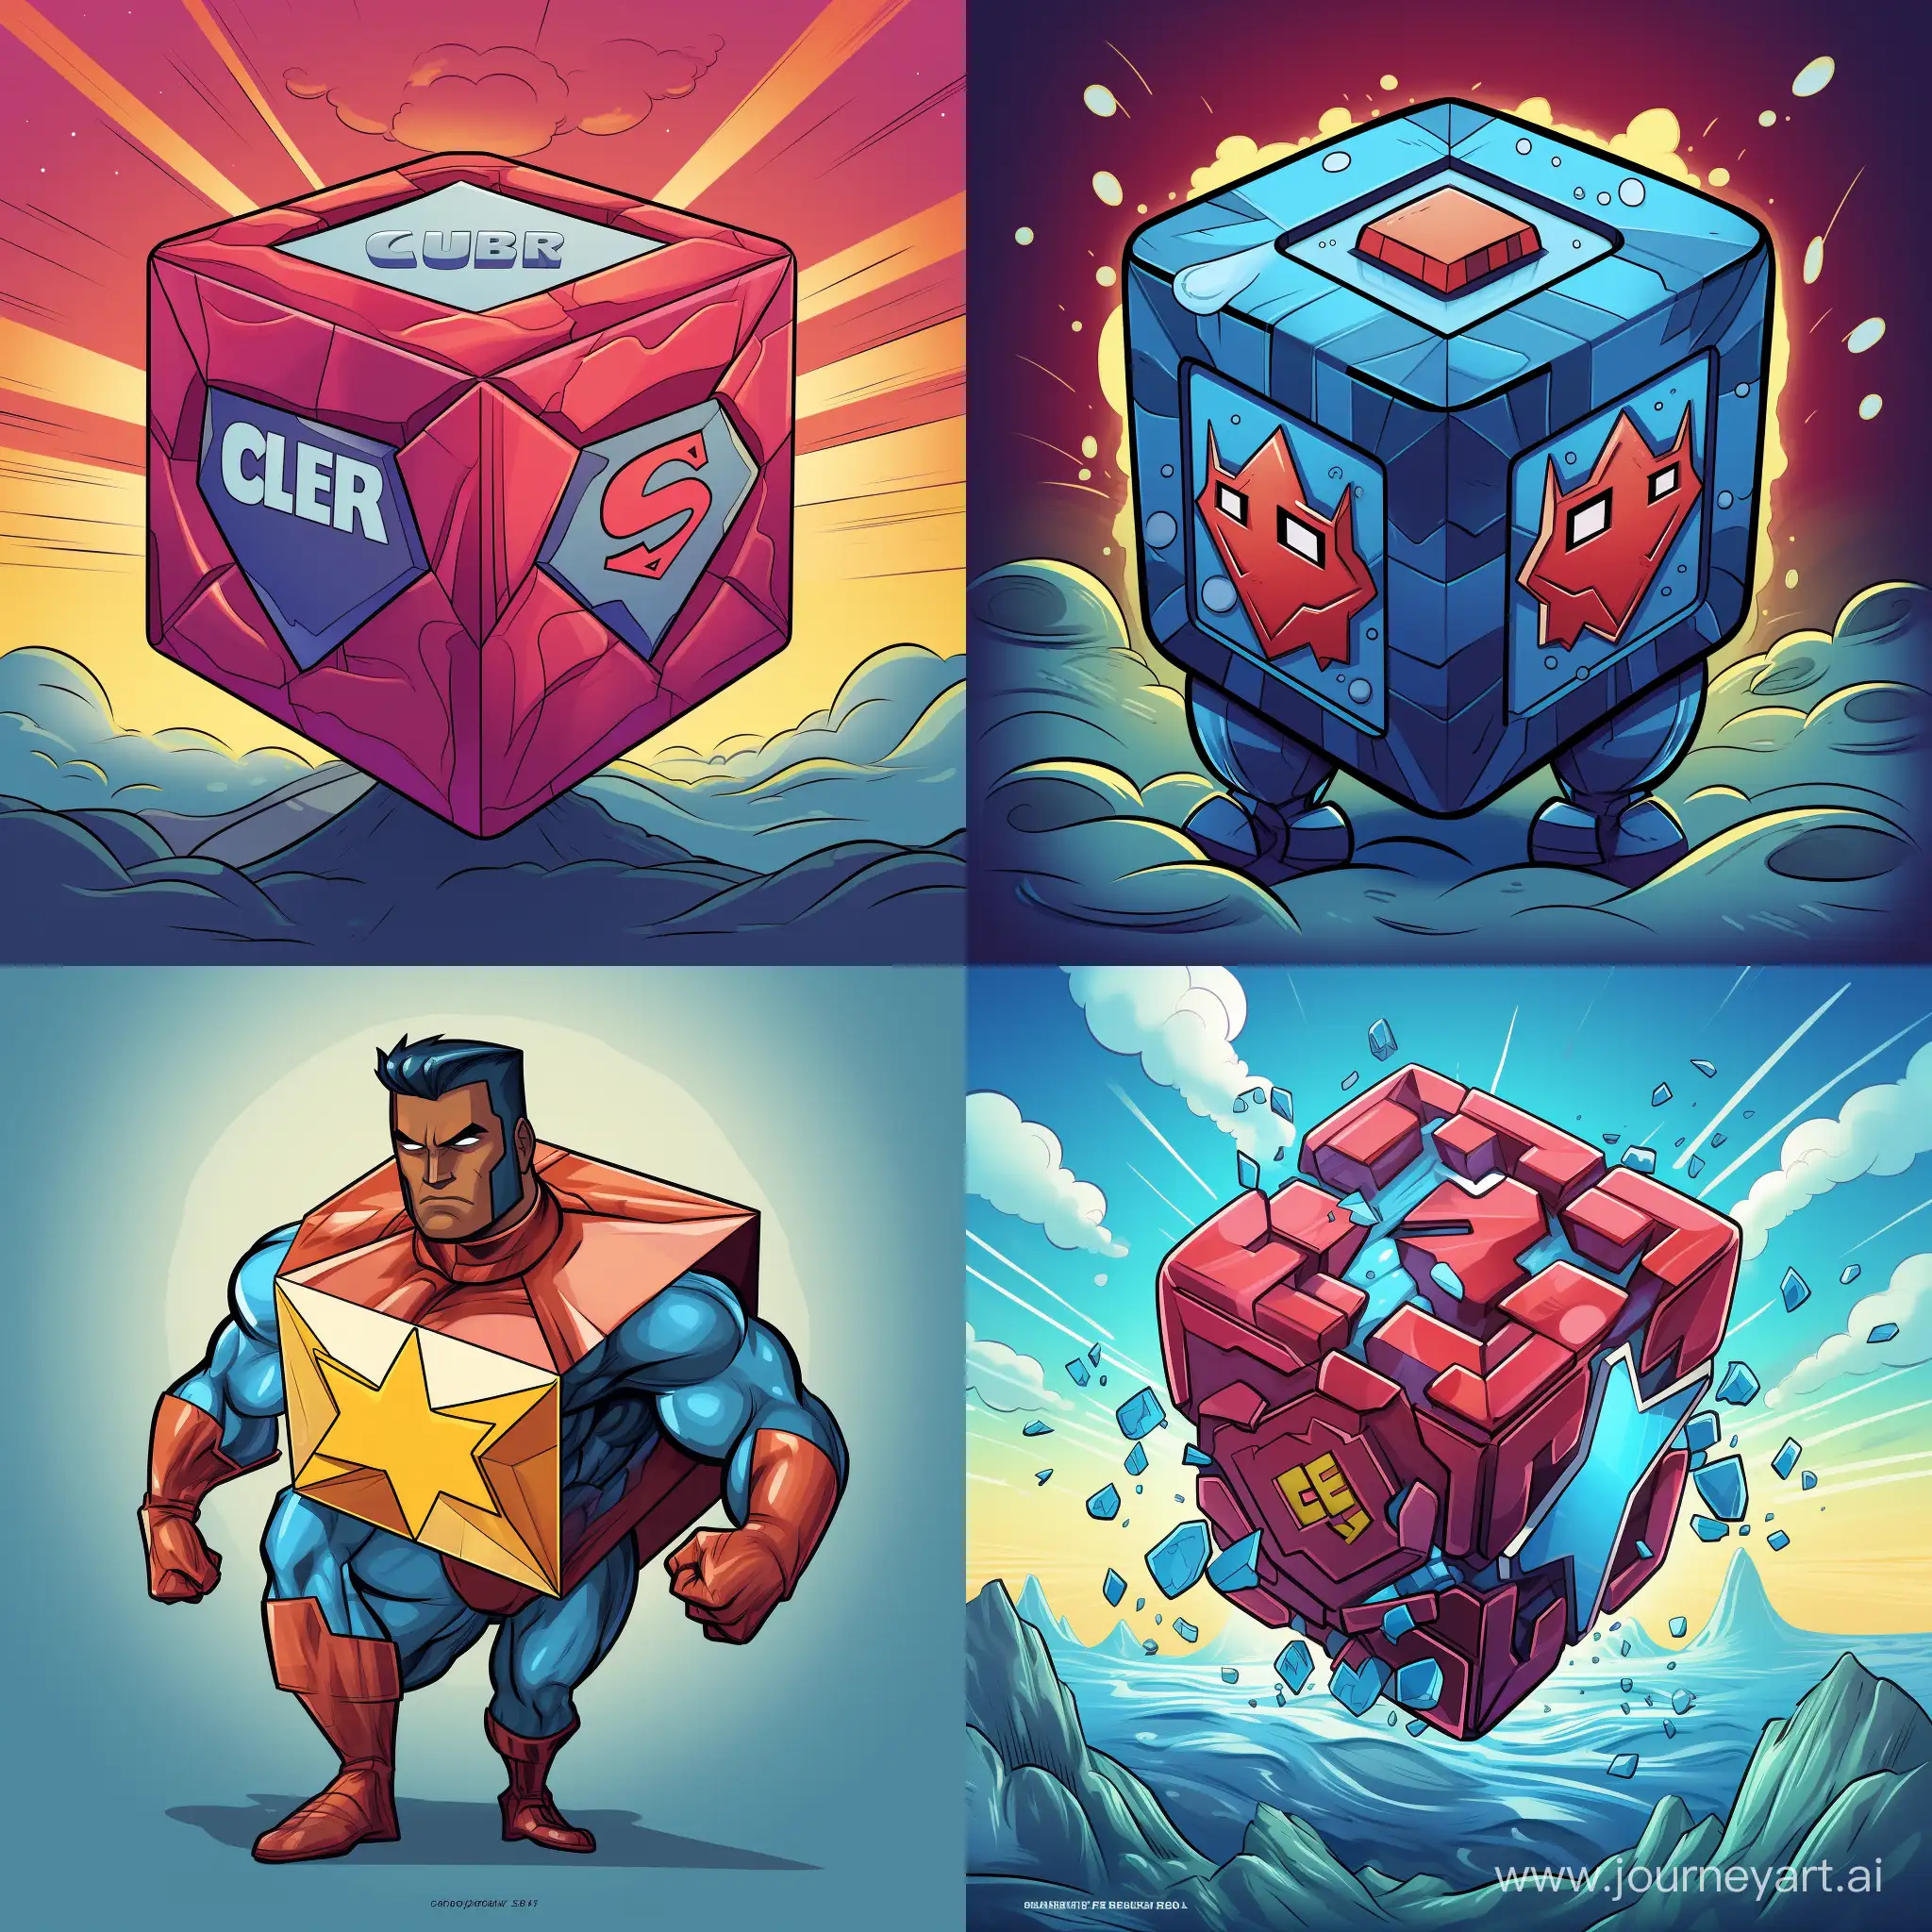 Illustration of a cube called Cuber that is a super heroe